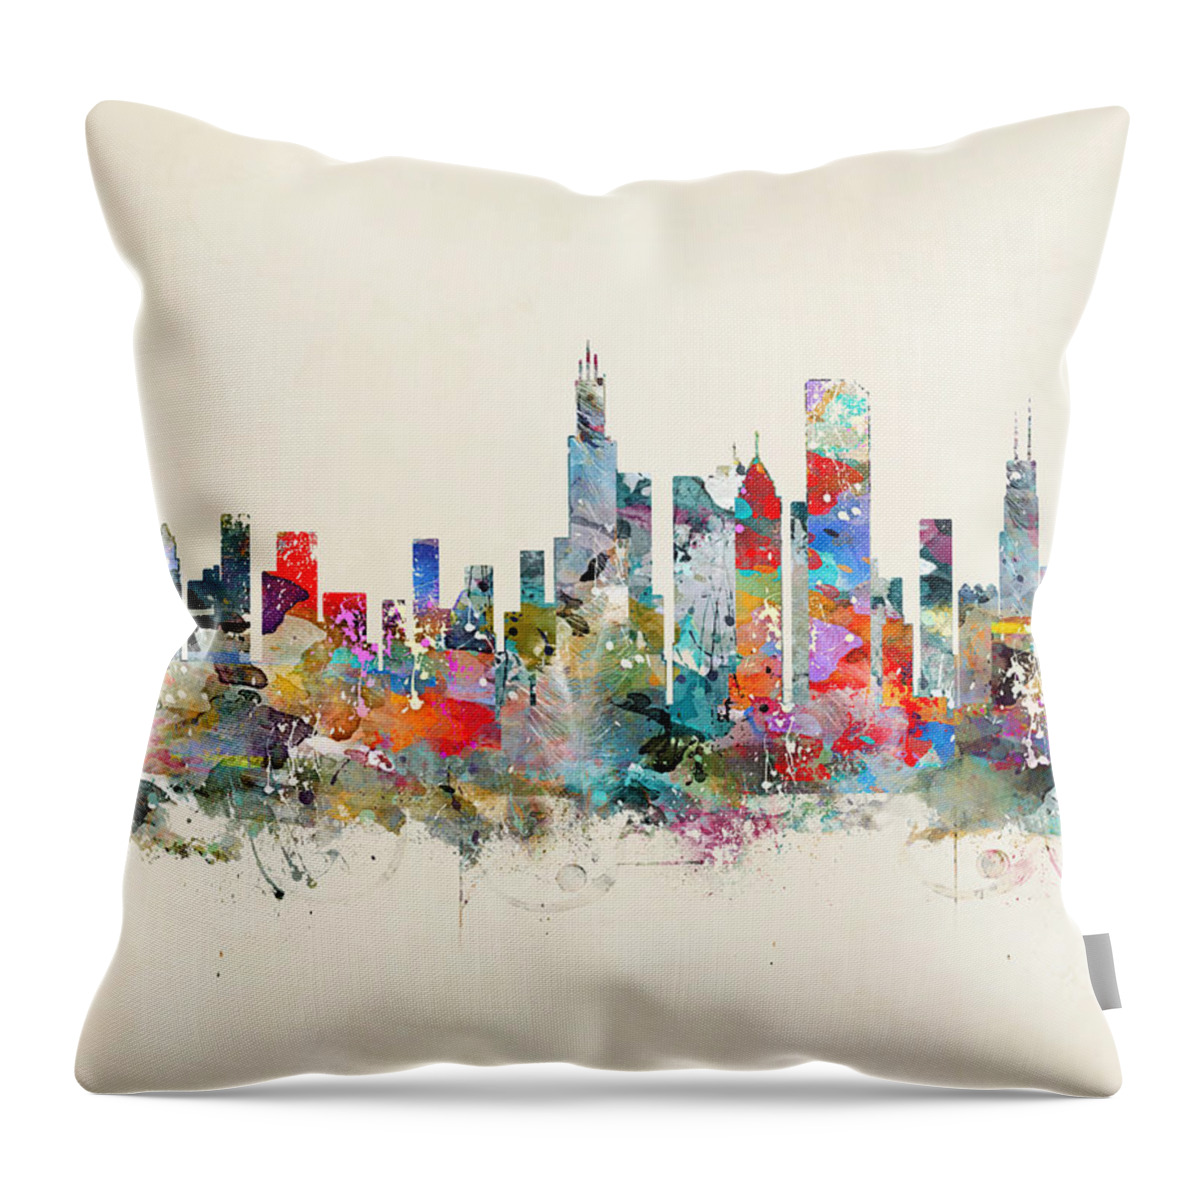 Chicago City Skyline Throw Pillow featuring the painting Chicago City Skyline by Bri Buckley